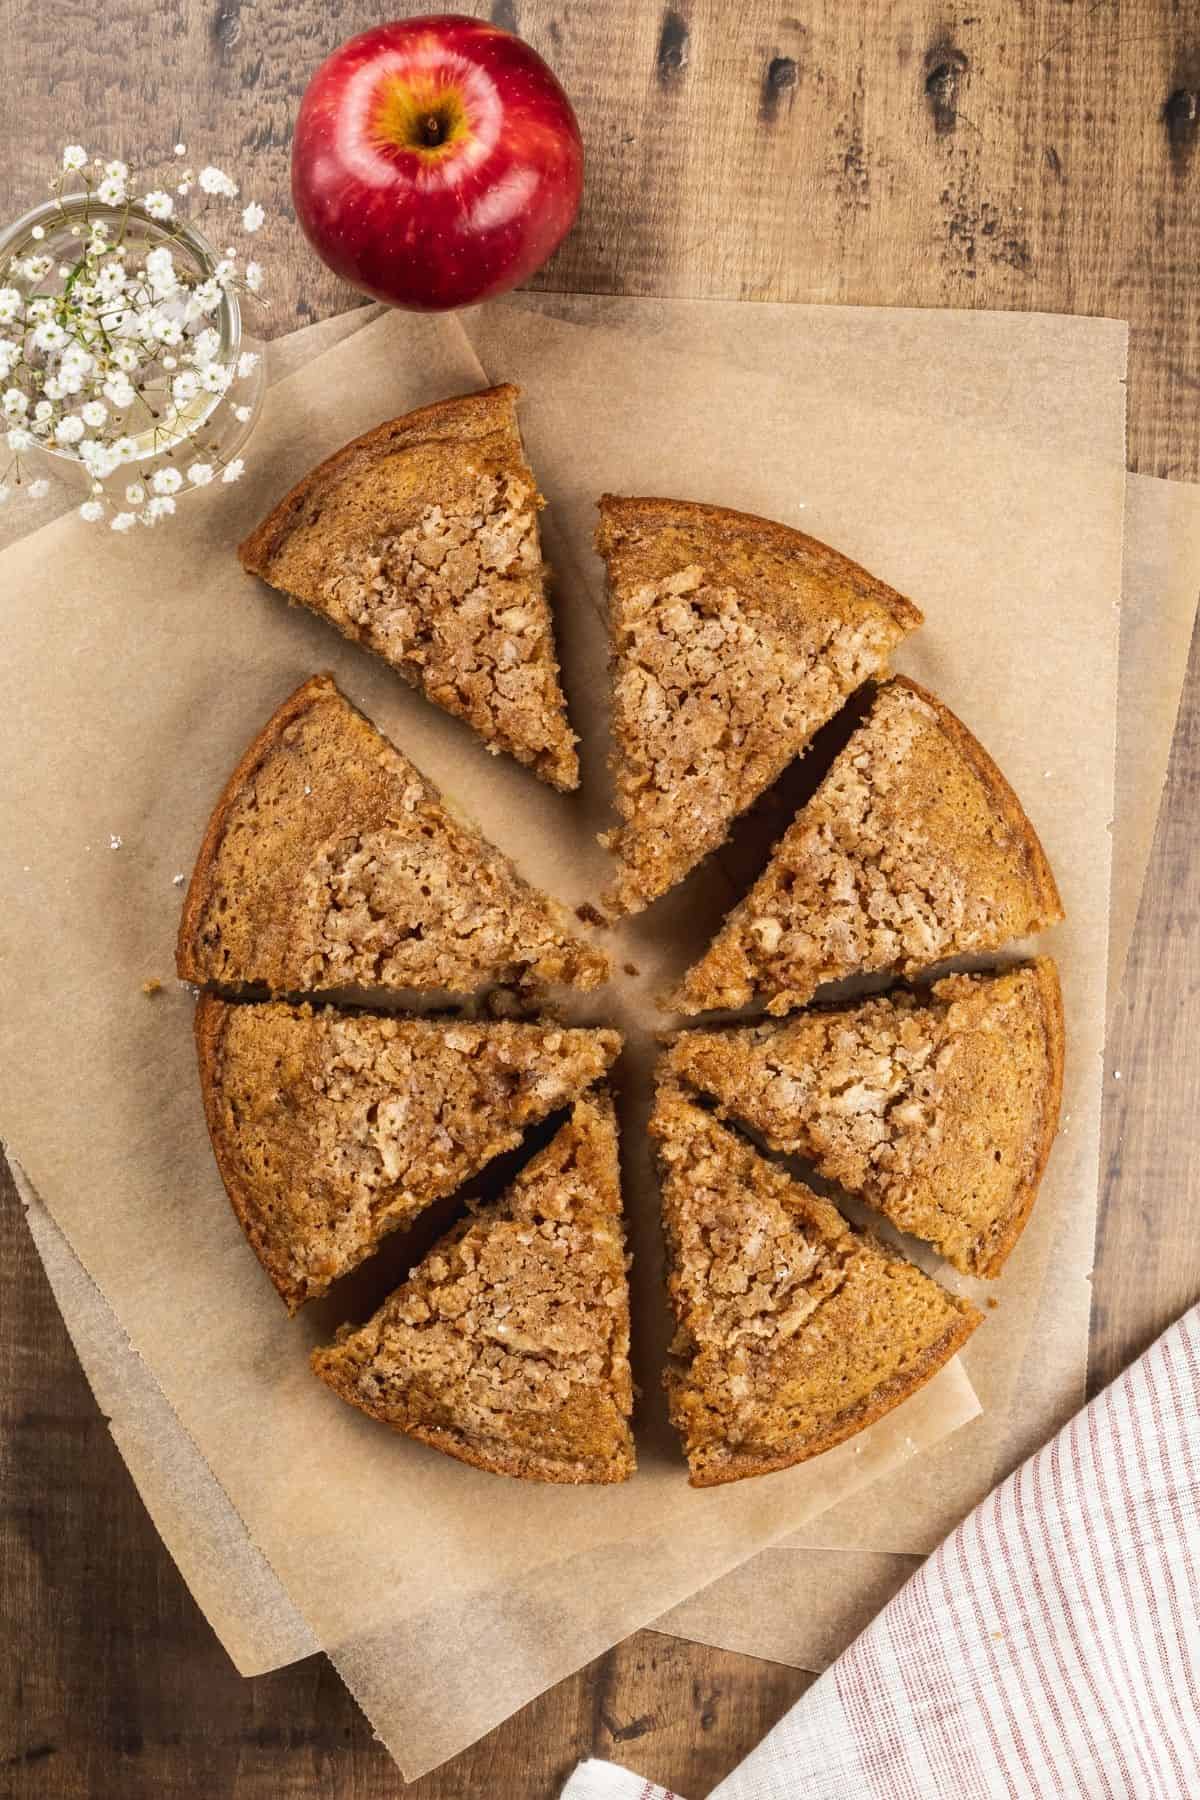 triangle slices of a round vegan apple cake are on brown parchment paper with tiny flowers in a vase next to it as well as an apple.